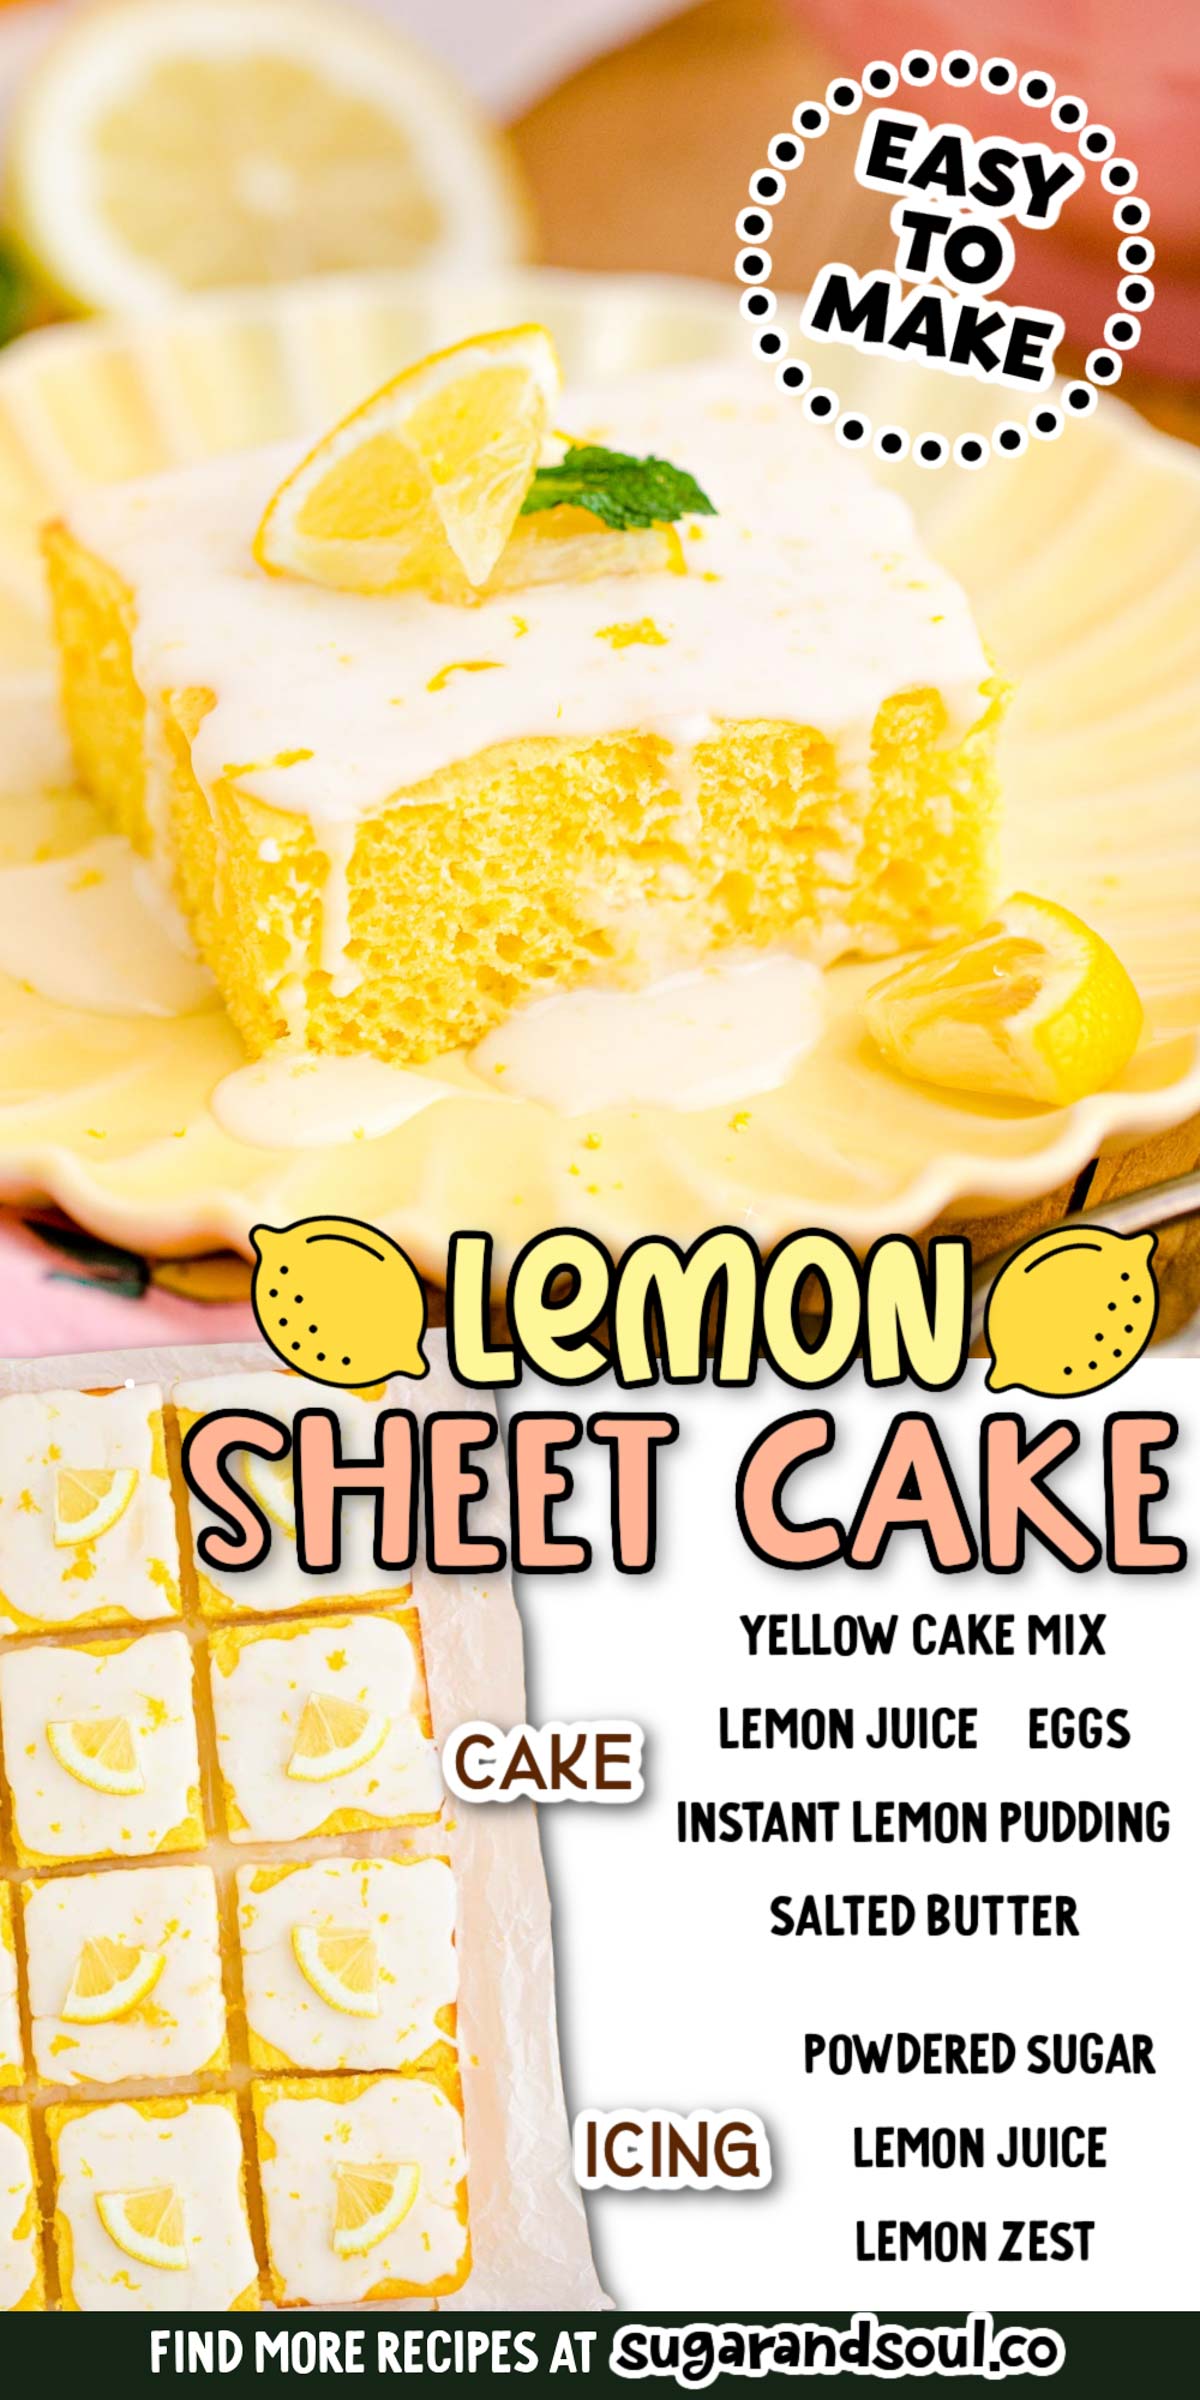 Lemon Sheet Cake is a tender, moist dessert that's made with a doctored-up boxed yellow cake mix and covered with a 3 ingredient lemon glaze! Ready to enjoy in just 35 minutes! via @sugarandsoulco